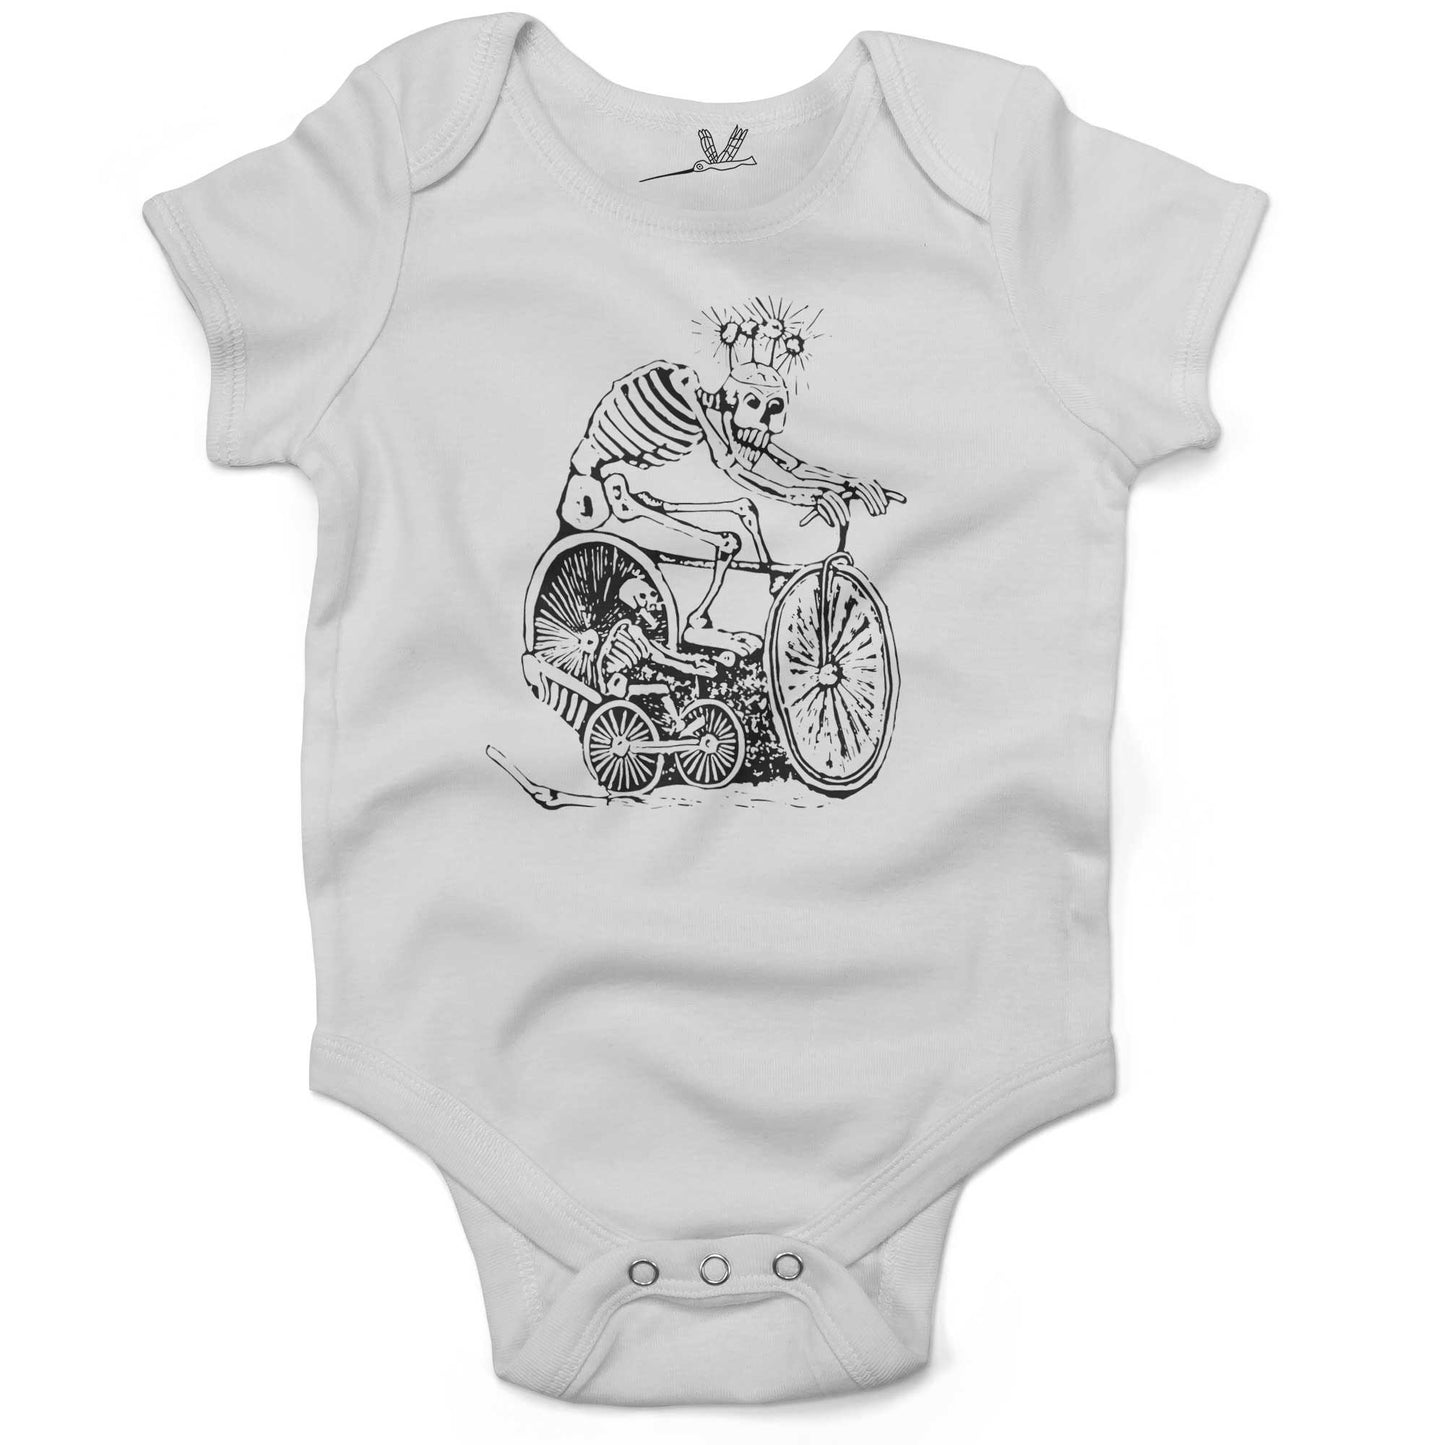 Day of the Dead Bikers Infant Bodysuit or Raglan Tee-White-3-6 months